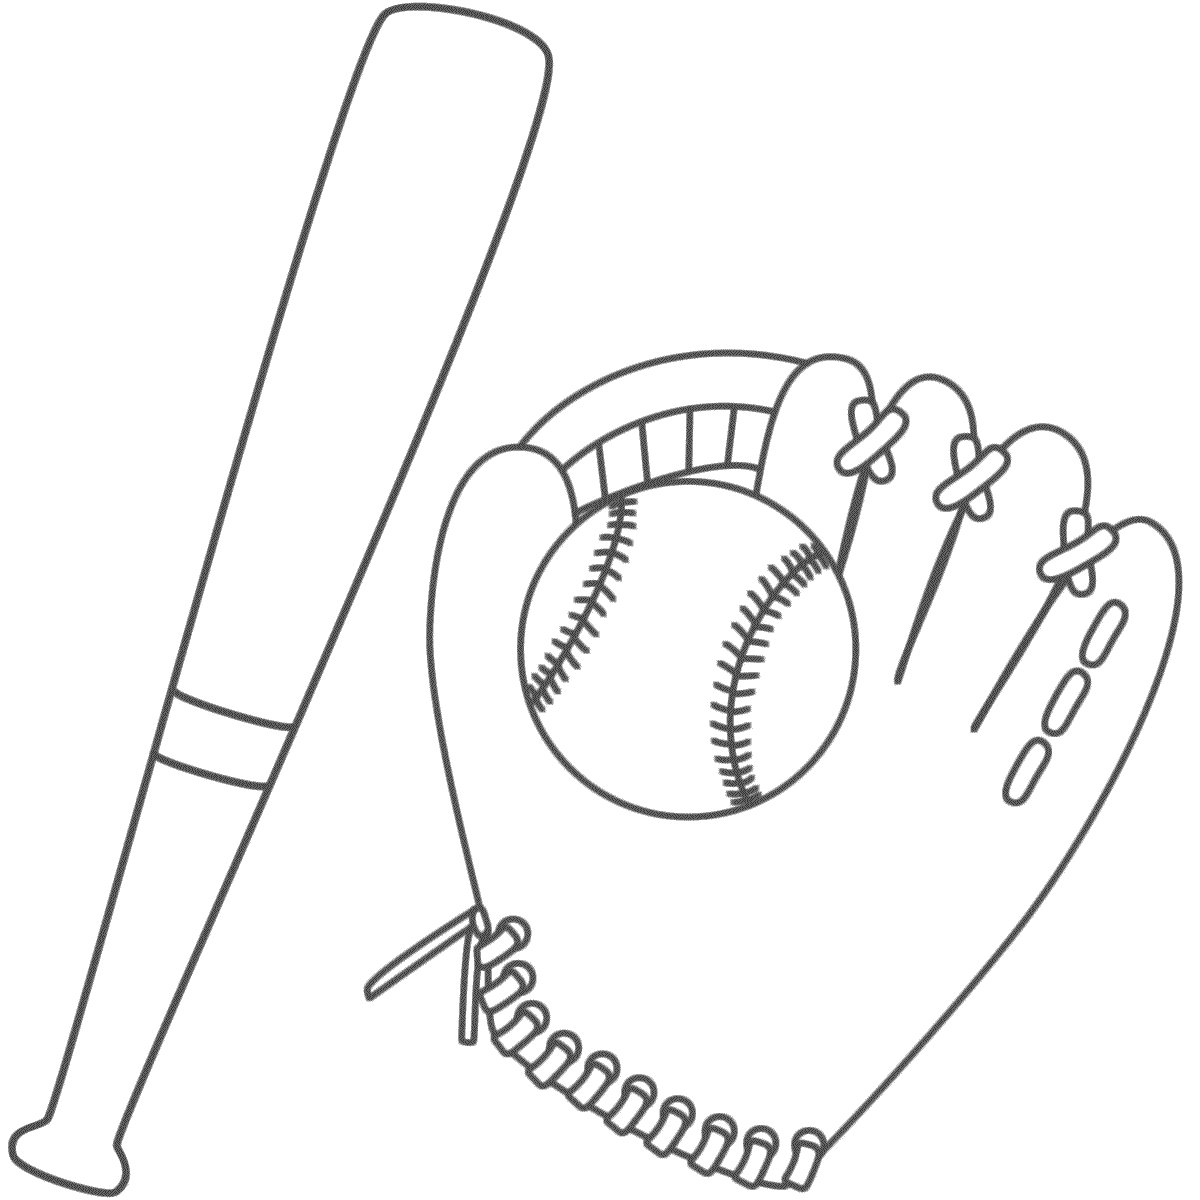 Bat and Baseball in a Glove - Coloring Page (Sports)